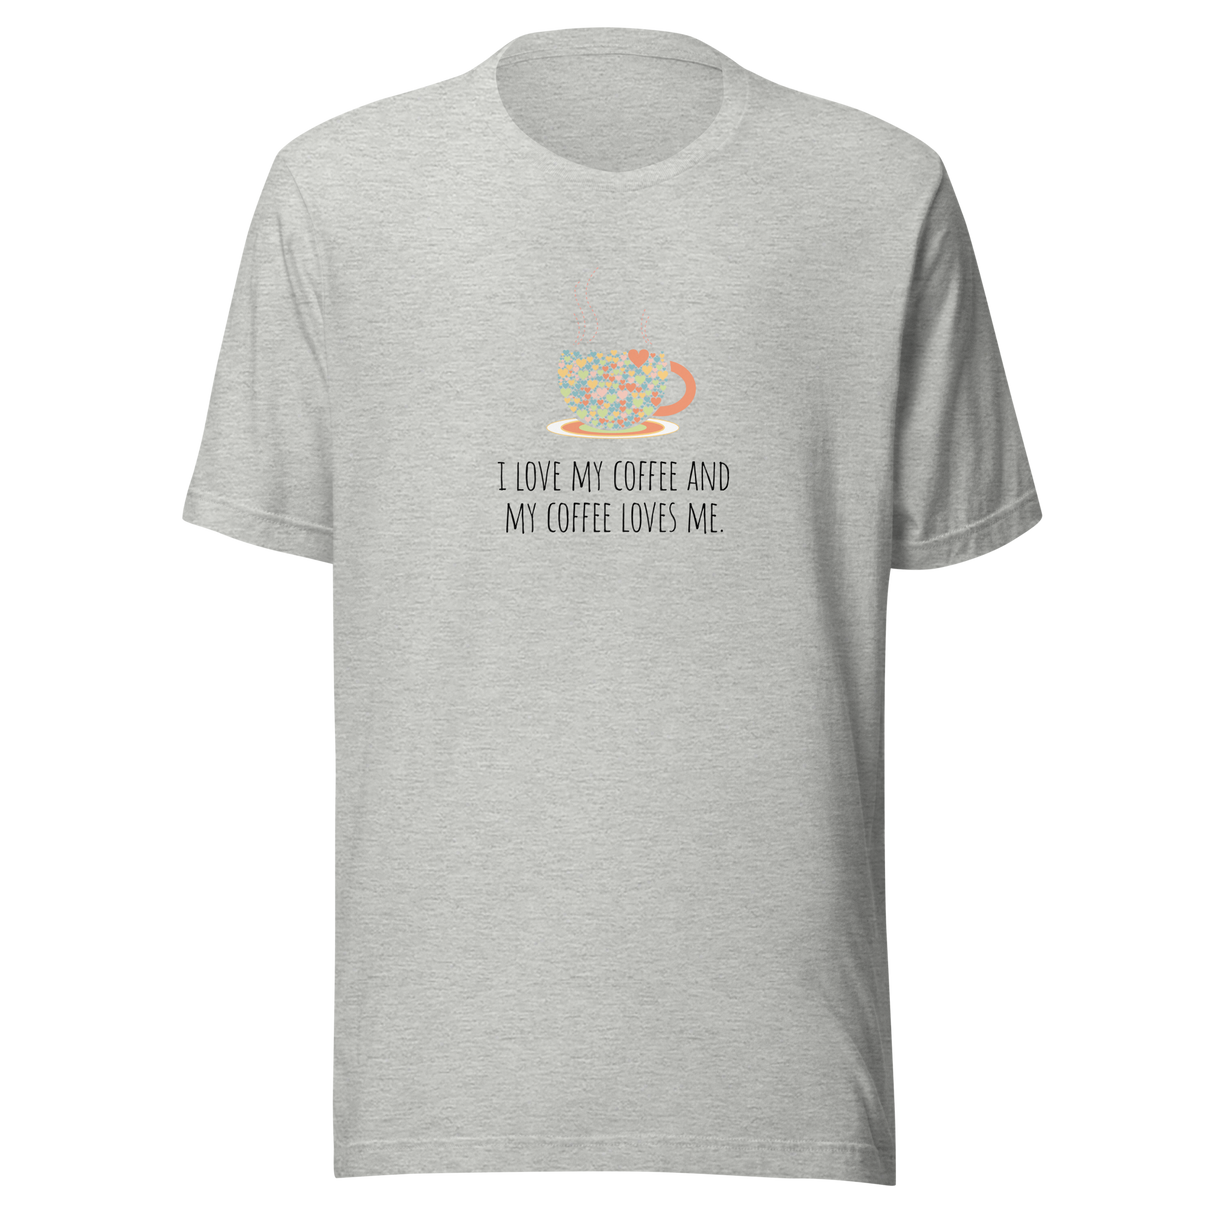 i-love-my-coffee-and-my-coffee-loves-me-coffee-tee-i-love-coffee-t-shirt-coffee-loves-me-tee-coffee-t-shirt-caffeine-tee#color_athletic-heather